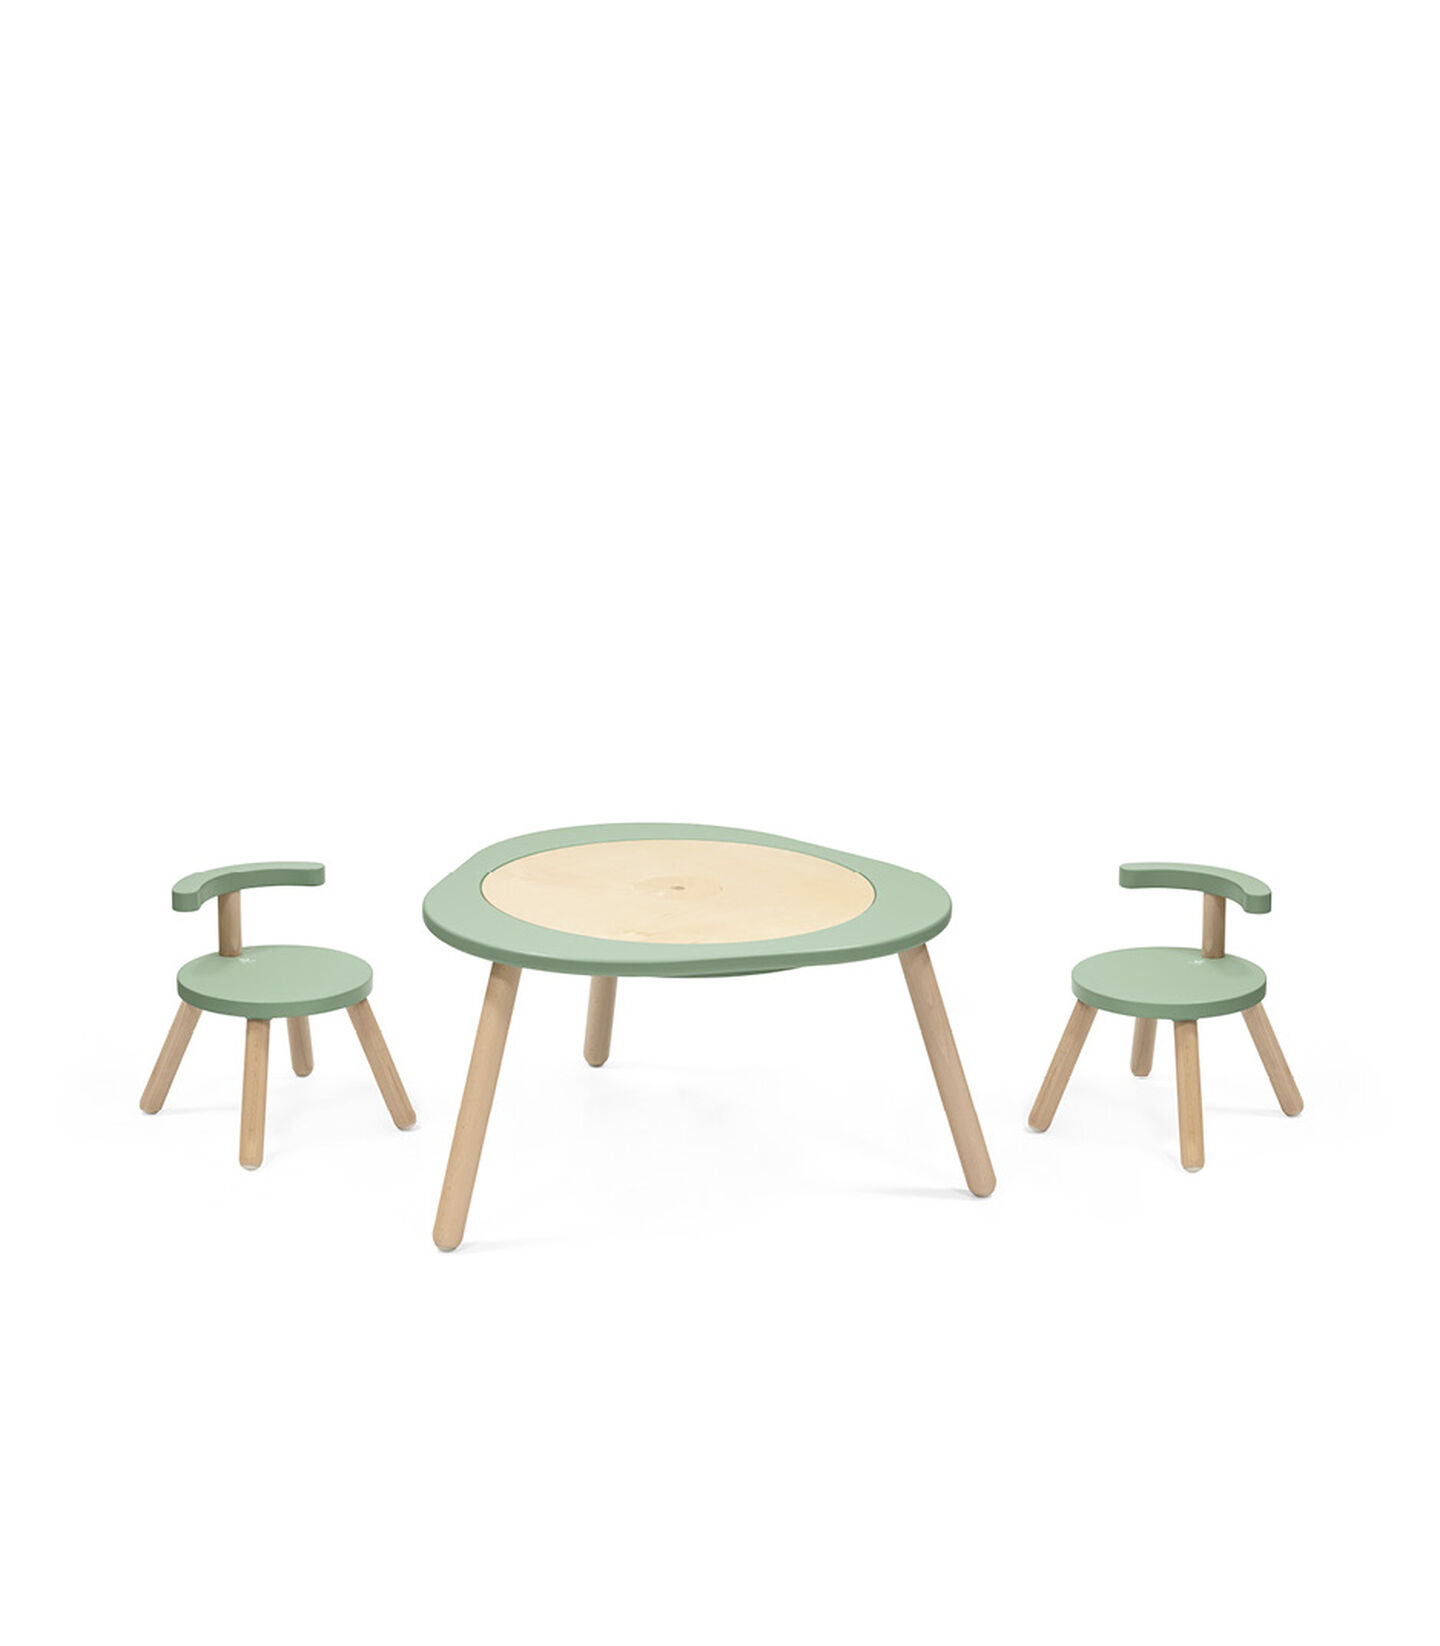 Stokke® MuTable™ Chair and Table C.over Green. Play Board. Bundle. incl two chairs. view 1